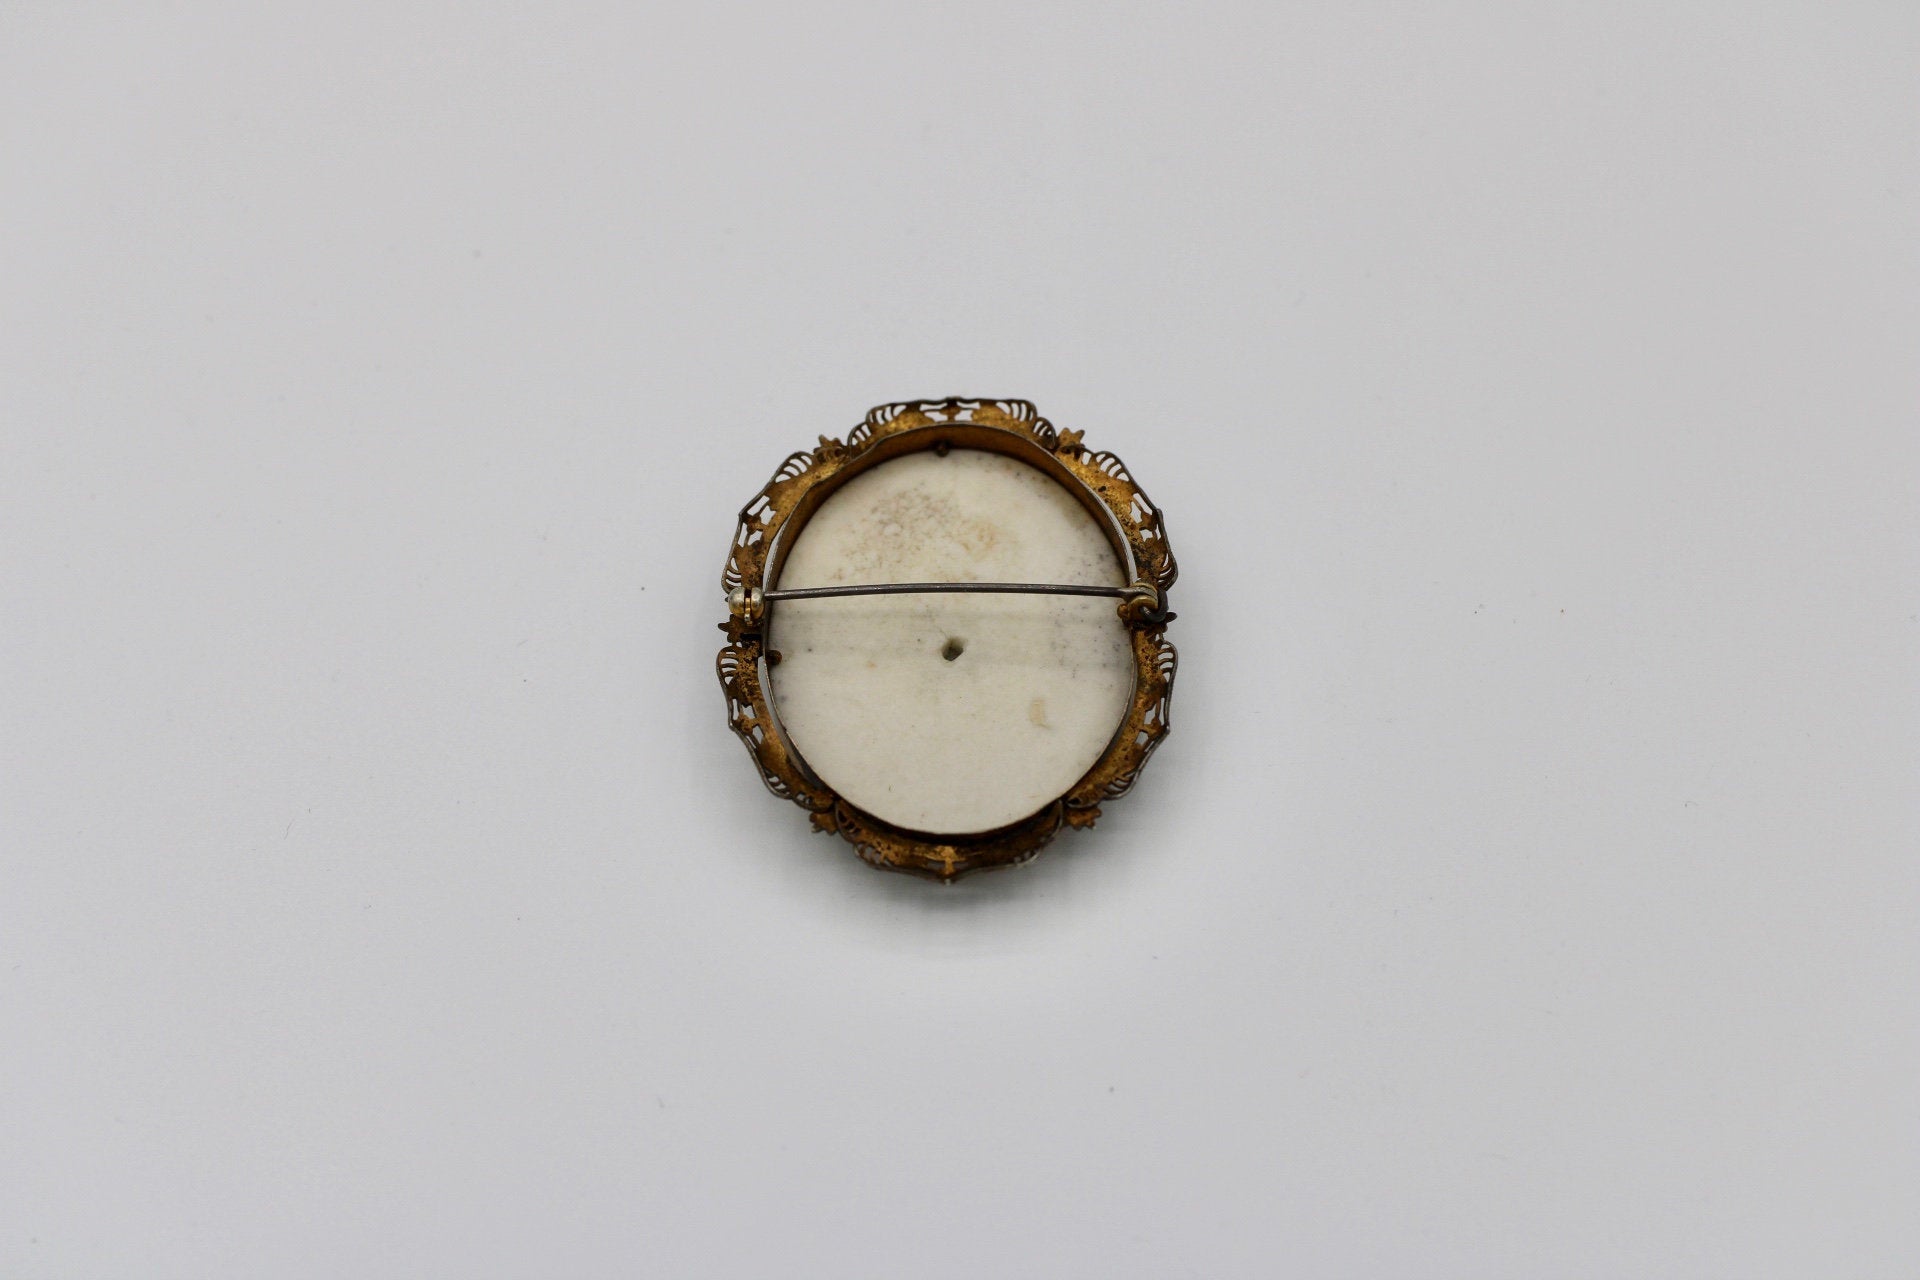 Hand Painted Porcelain Brooch; Victorian